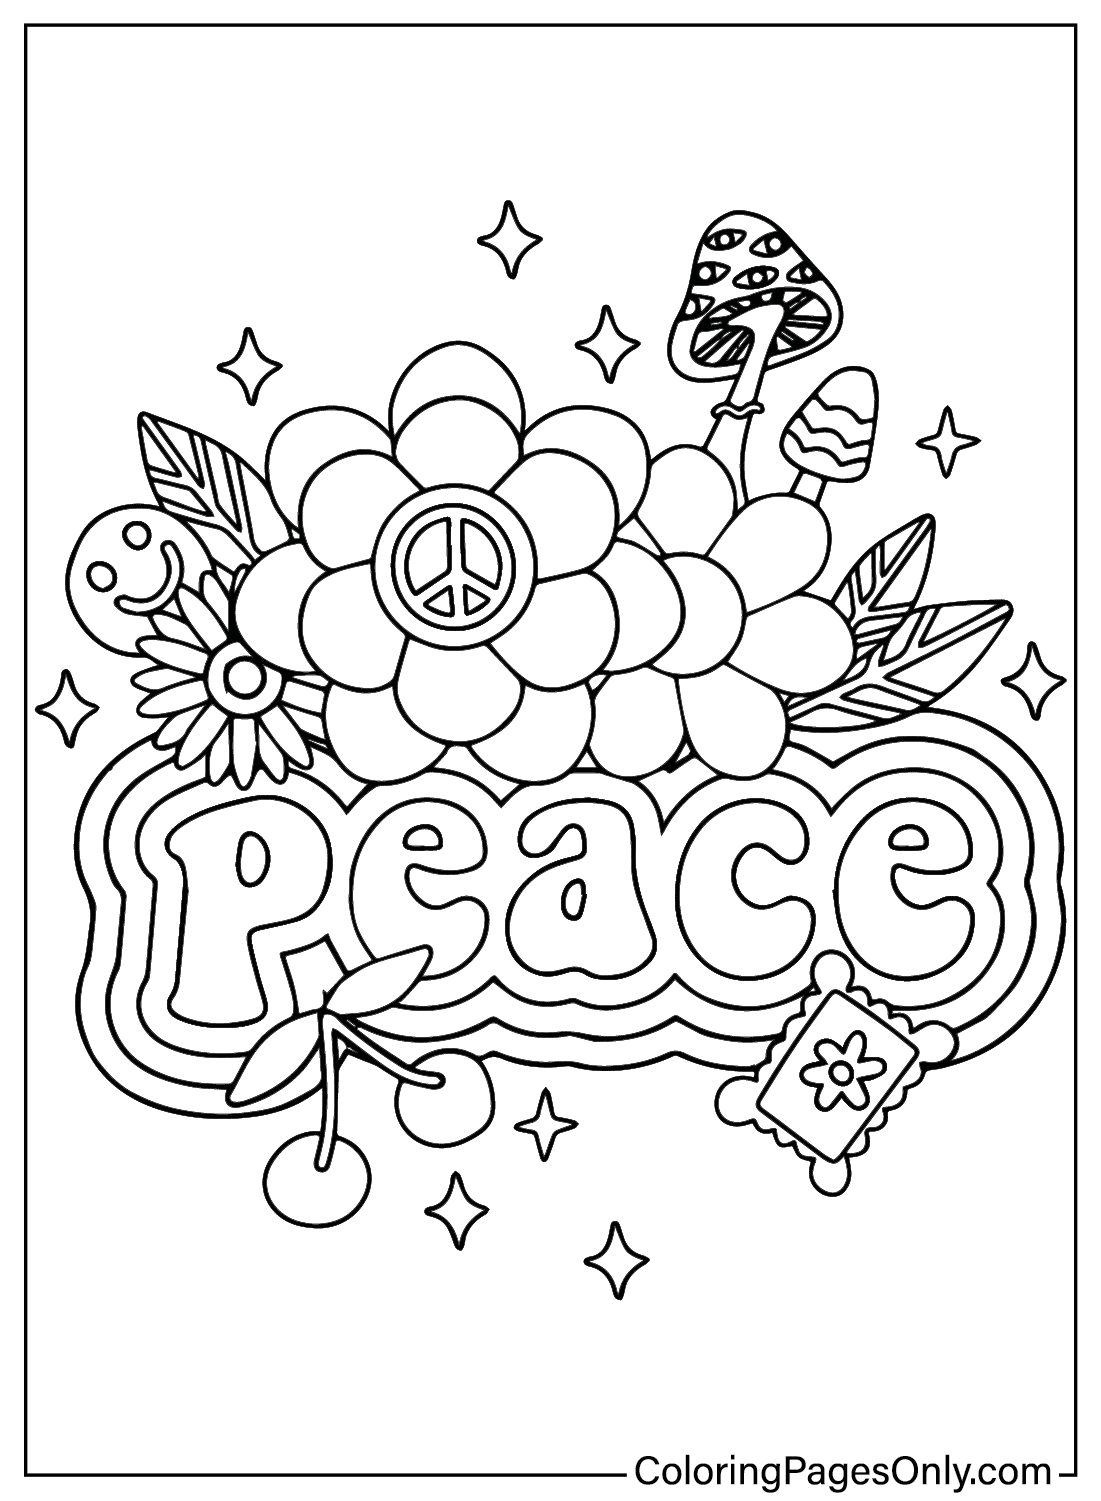 International Day of Peace Coloring Sheet for Kids